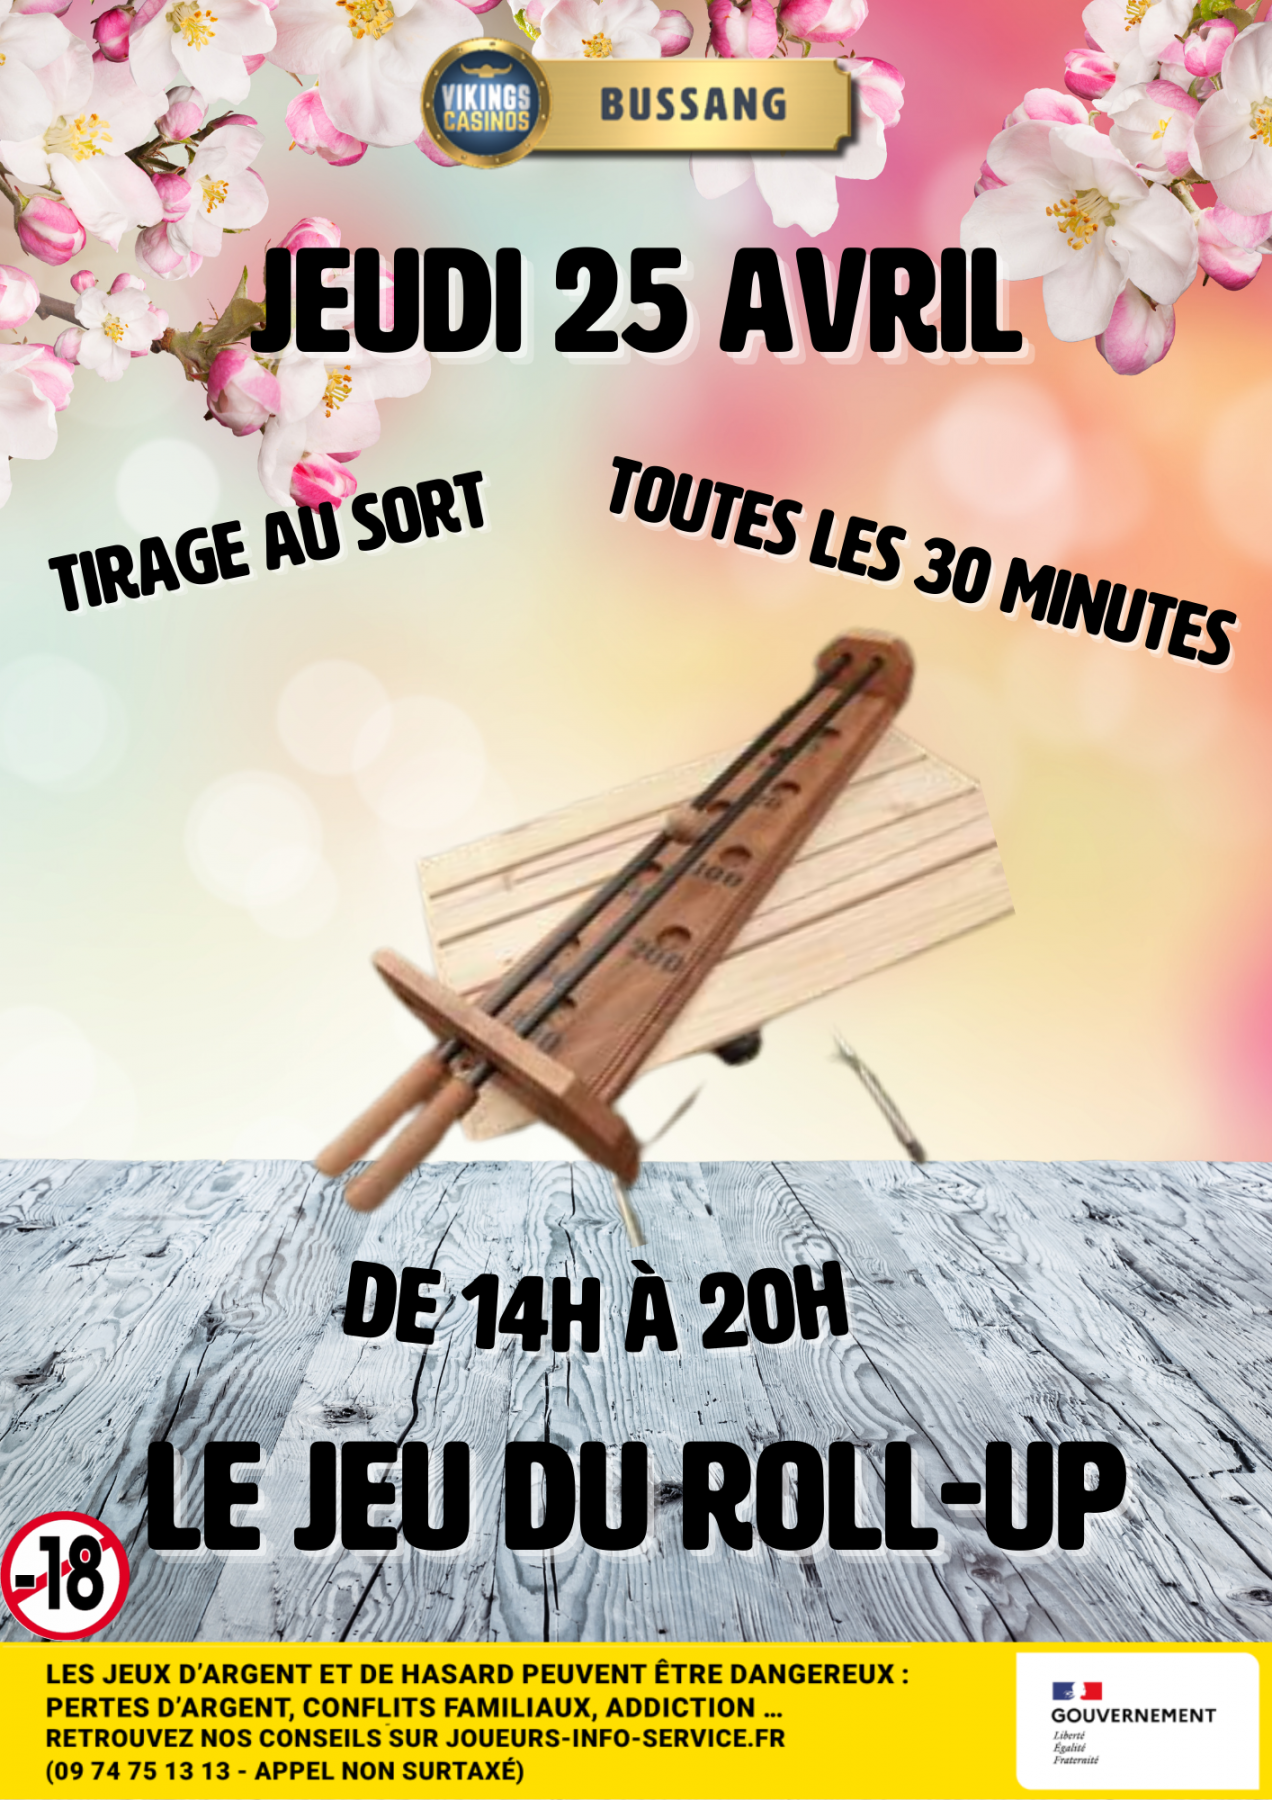 Le roll up